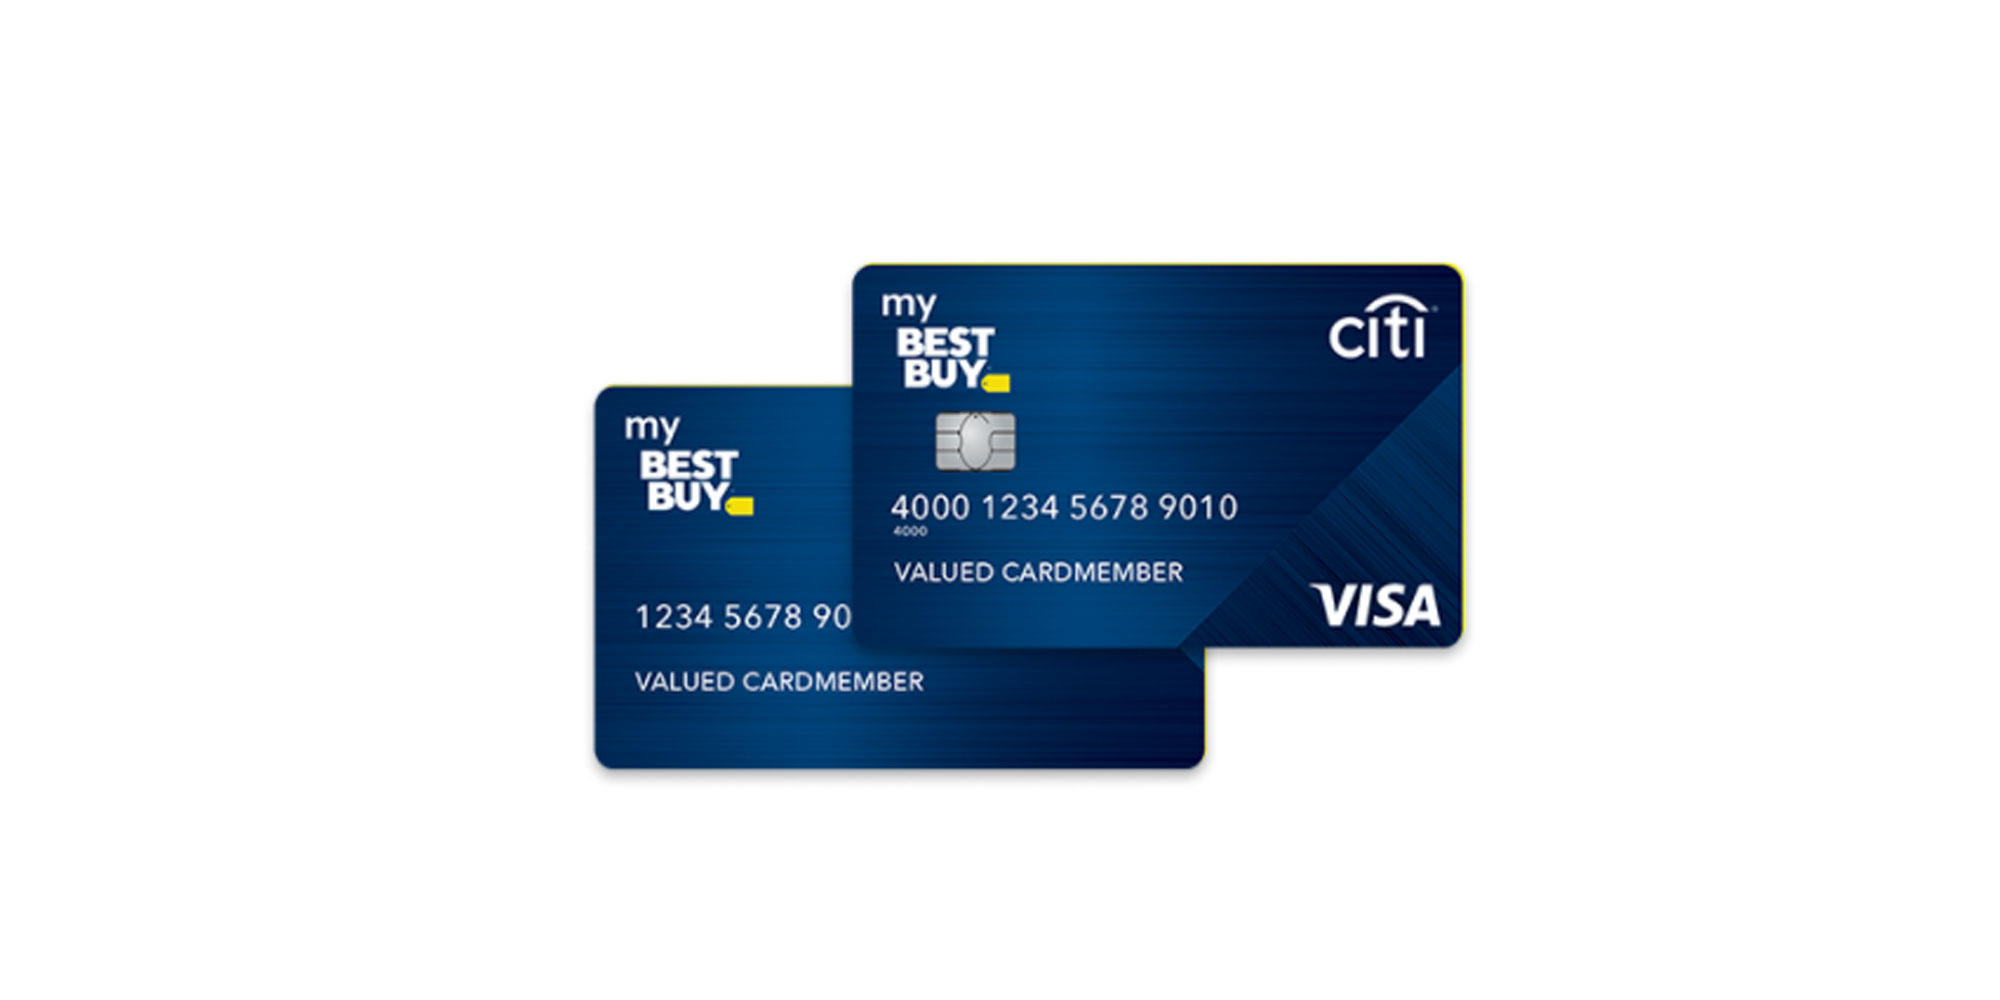 Best Buy Credit Card Account Information